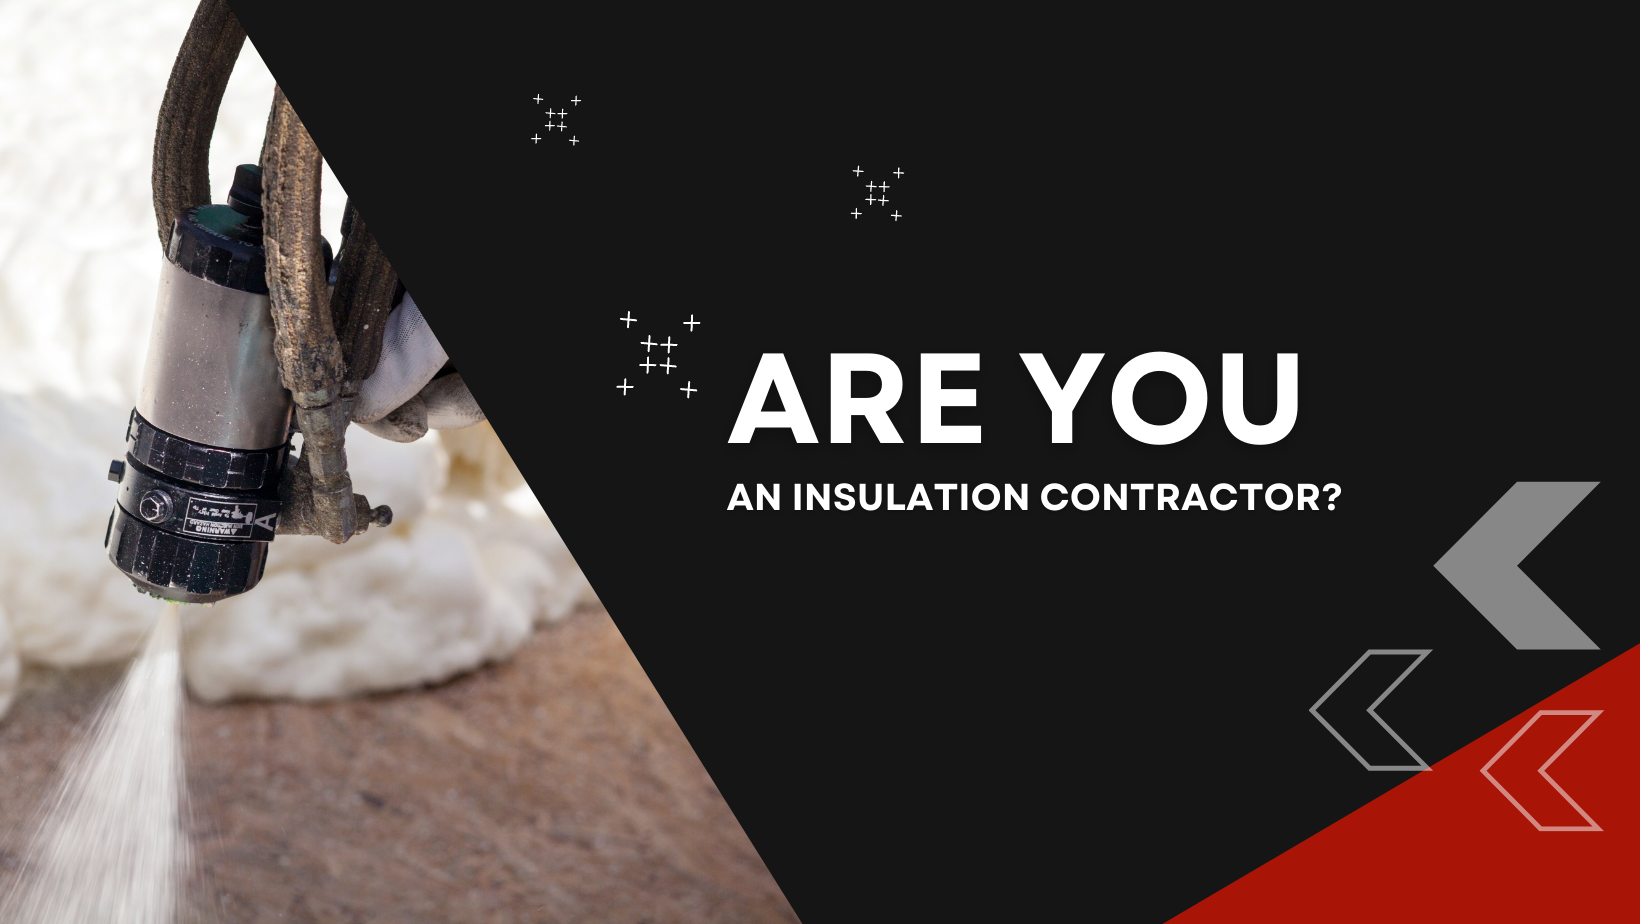 an insulation contractor?